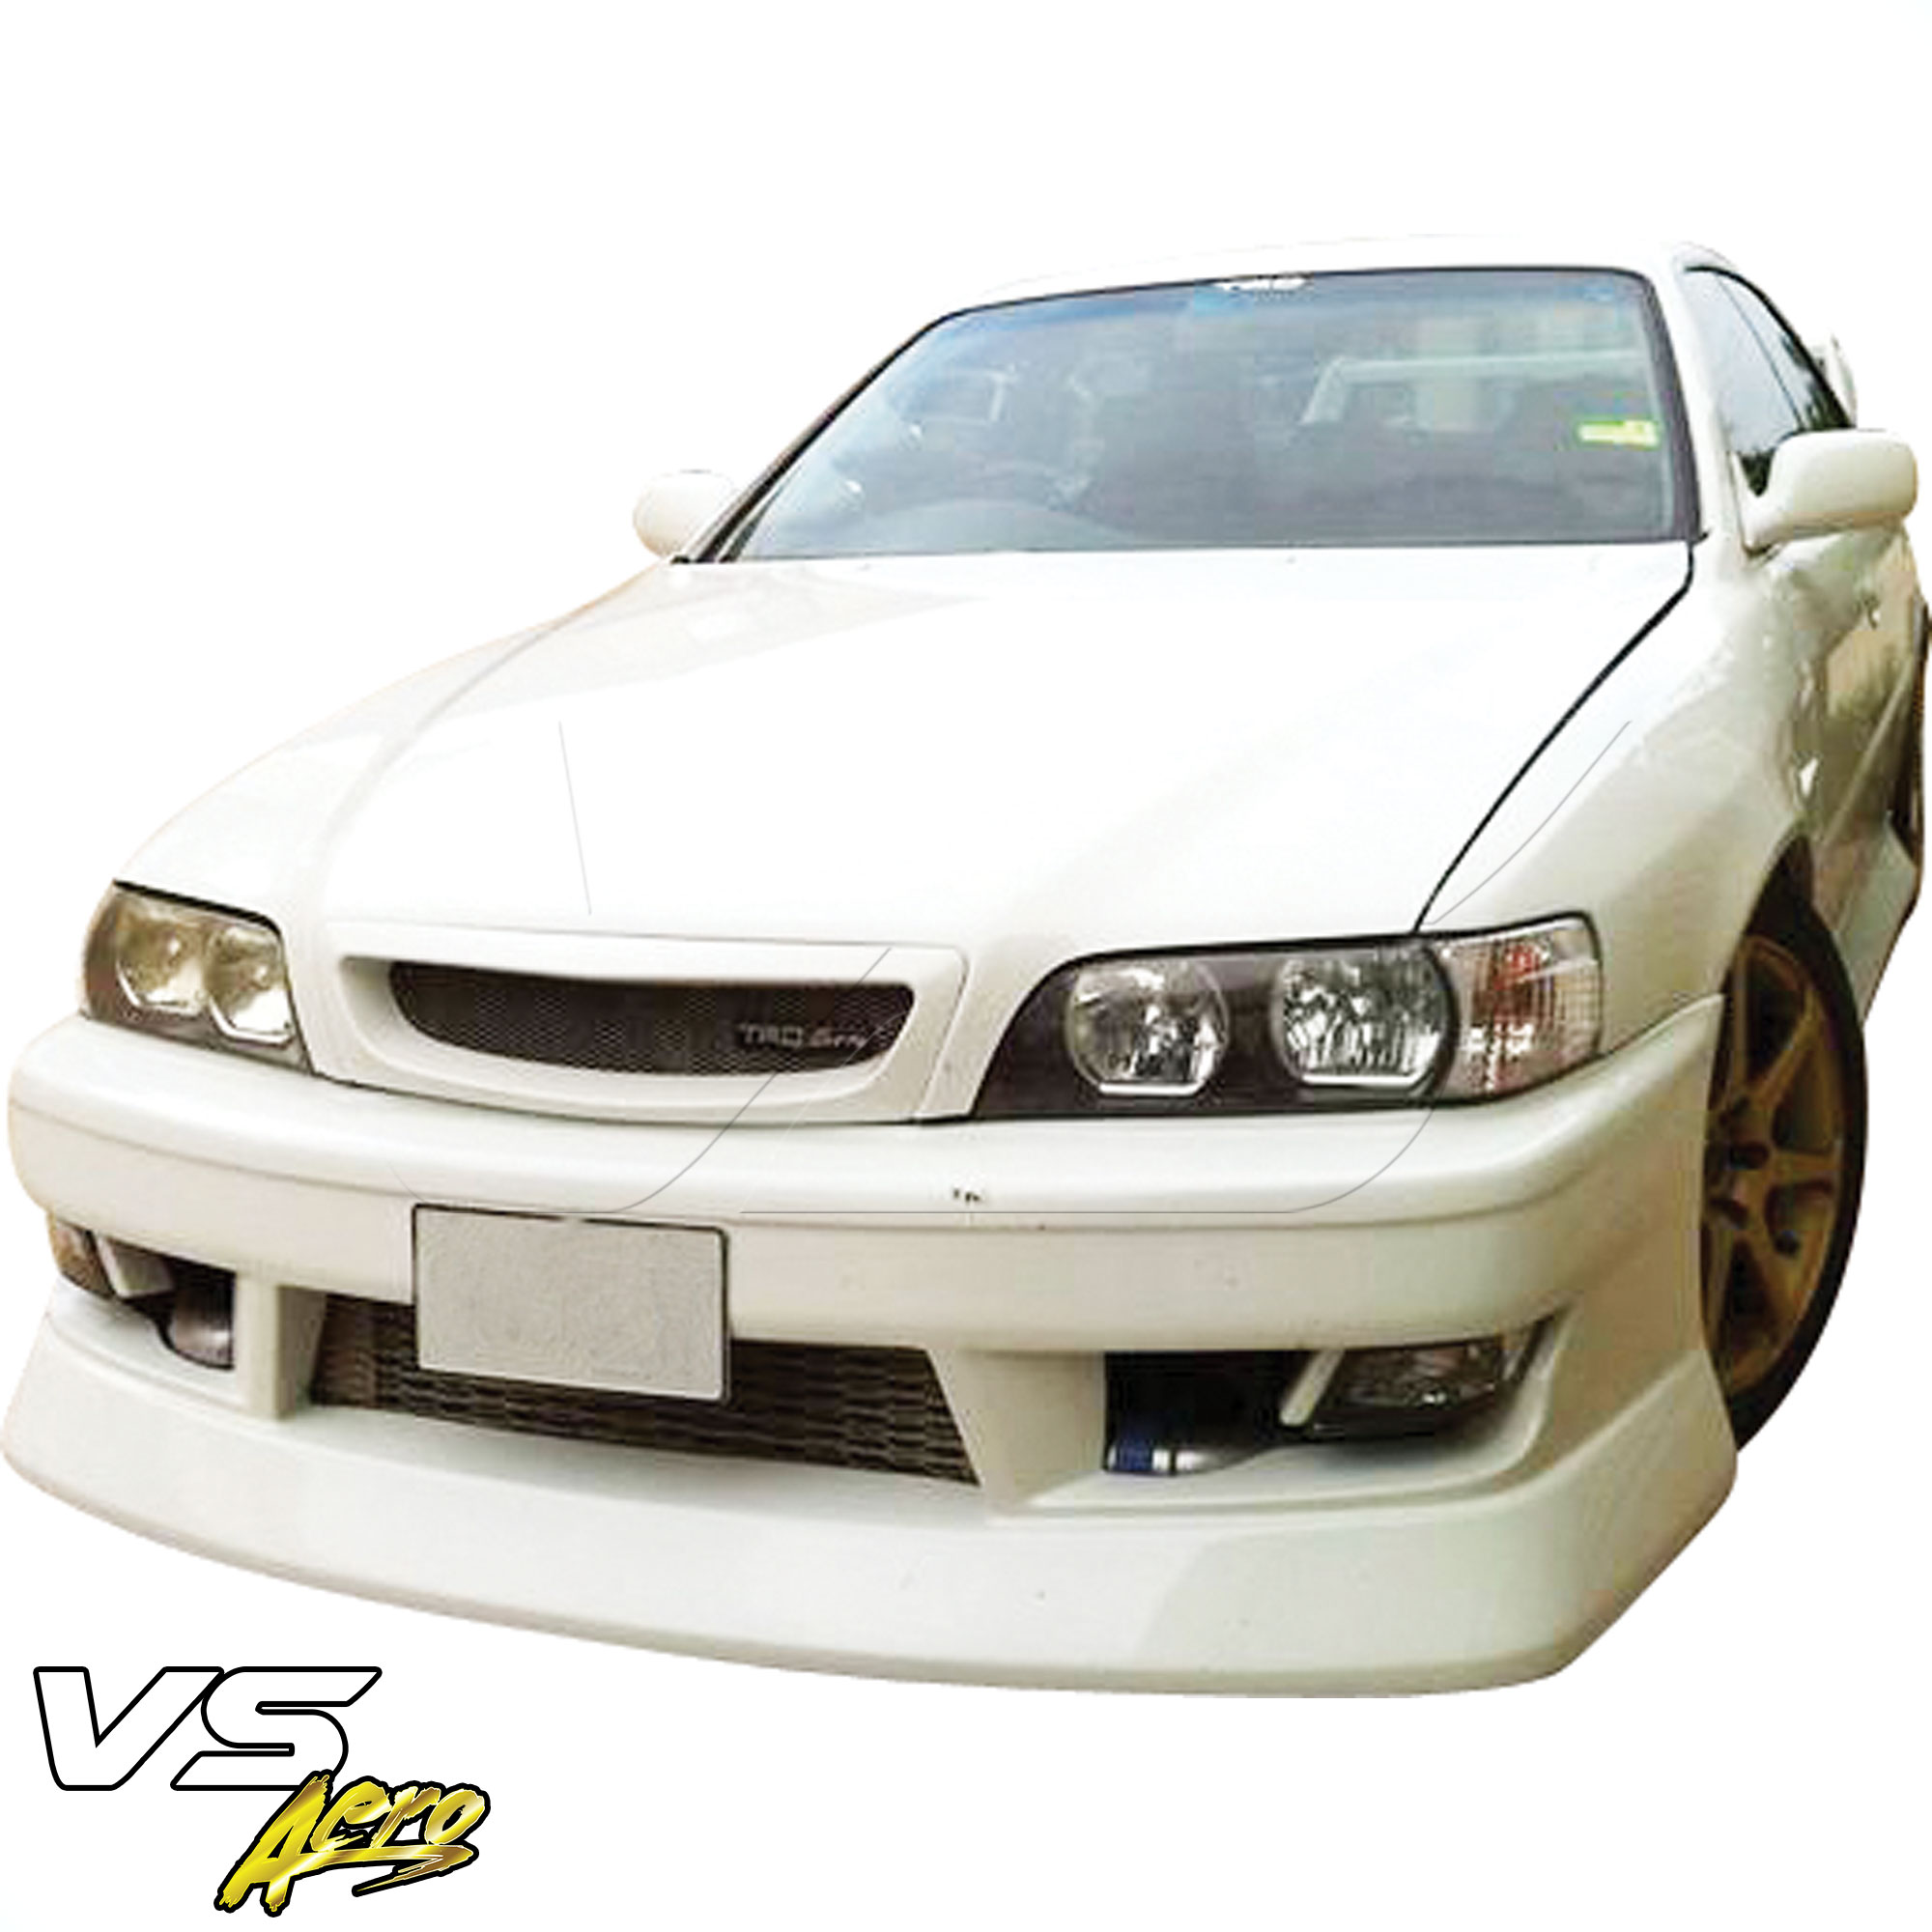 VSaero FRP BSPO Front Bumper > Toyota Chaser JZX100 1996-2000 - Image 7